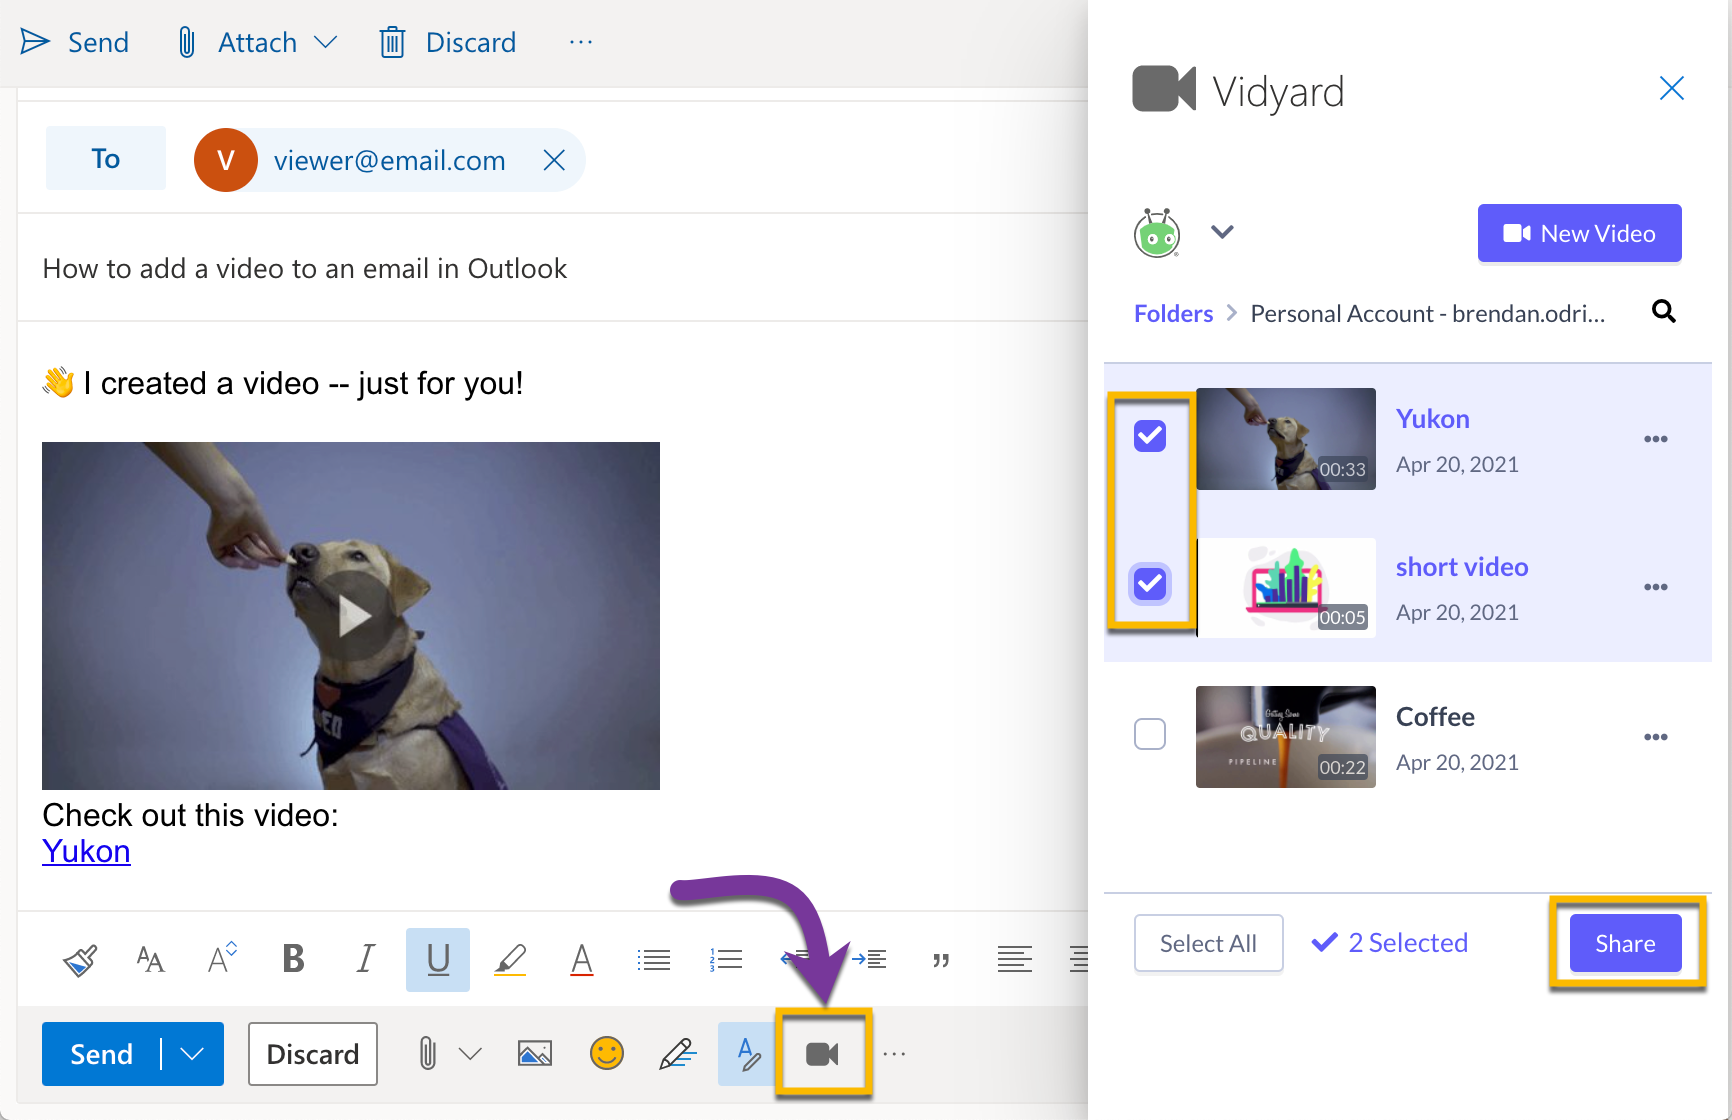 On the Outlook web app, opening your Vidyard library then selecting 1 or more videos to share in an email